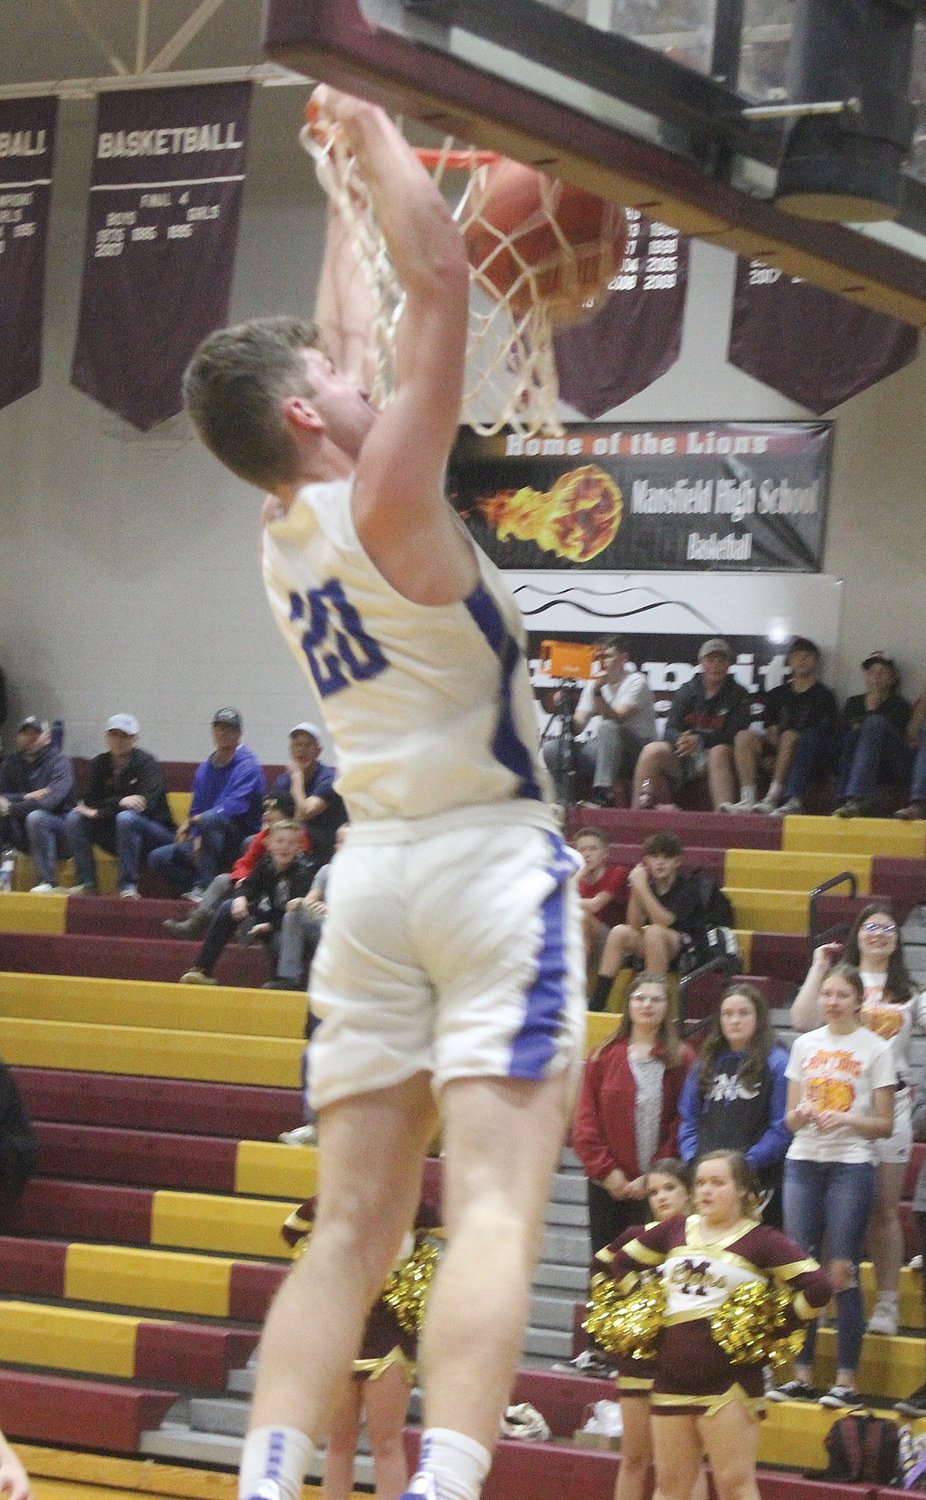 Norwood’s Garrett Davault goes up for one of his five first-half dunks against rival Mansfield in the tournament semifinals.